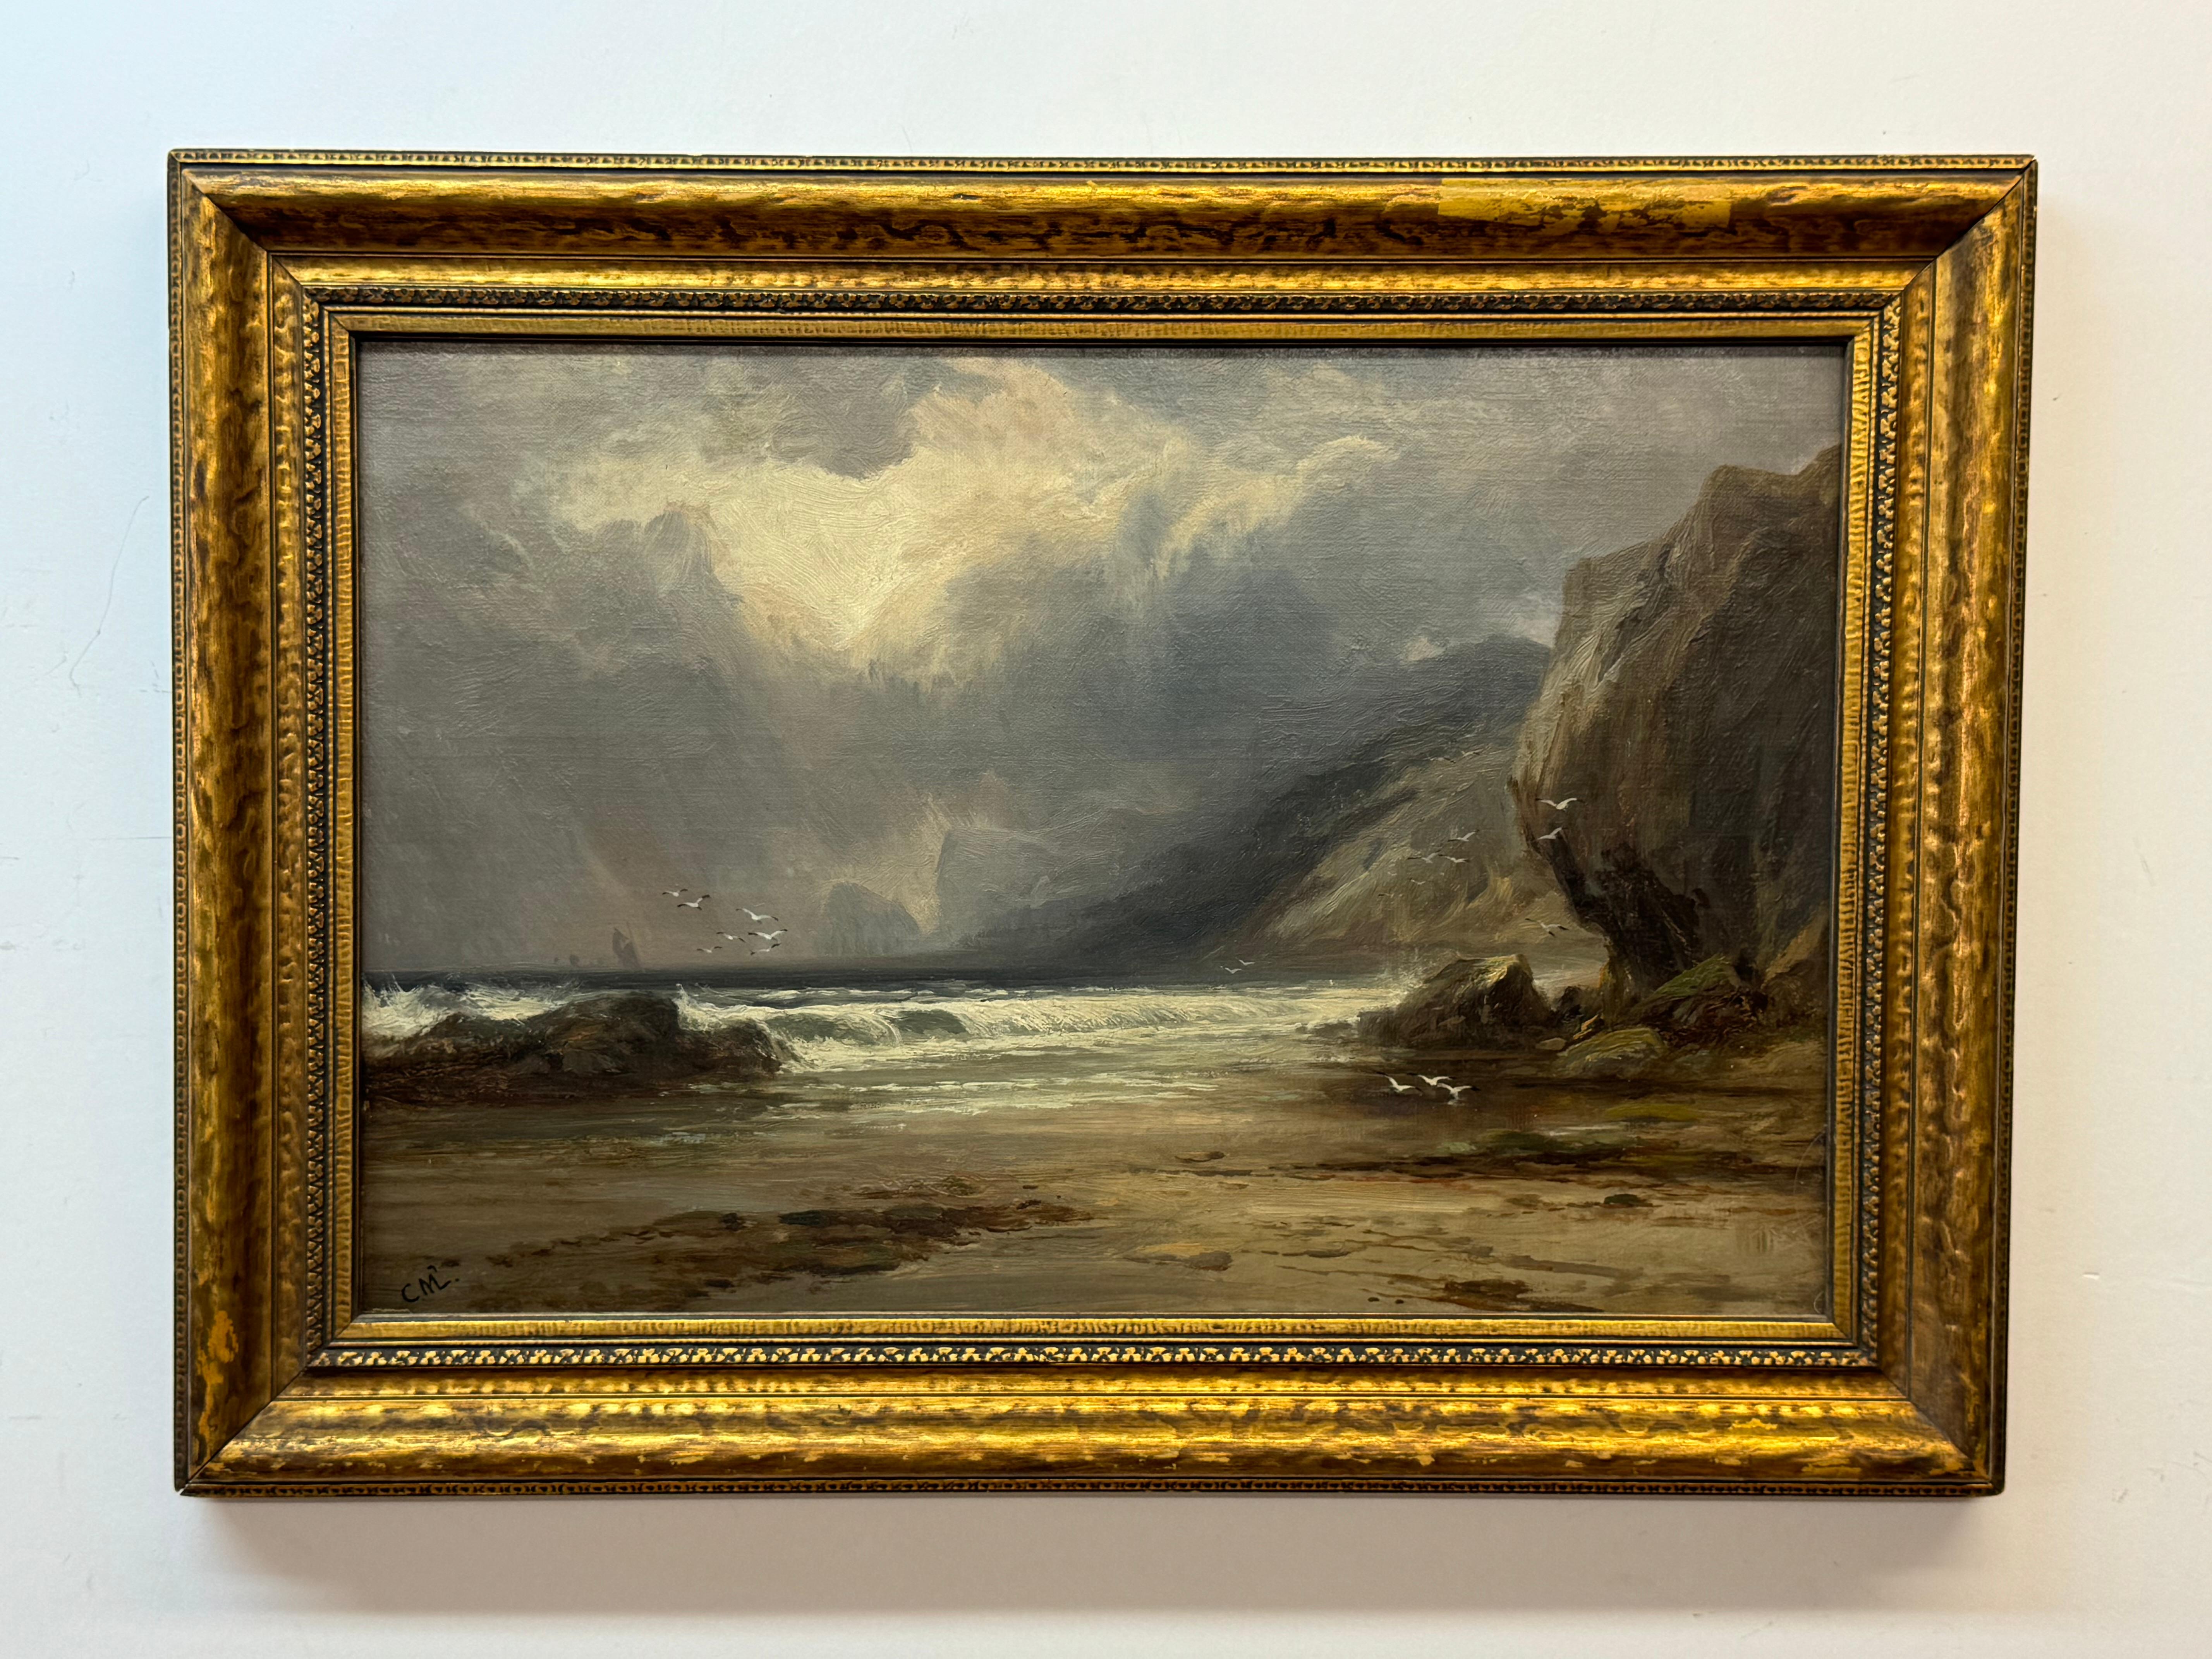 Unknown Landscape Painting - Early 20th century California seascape paintings